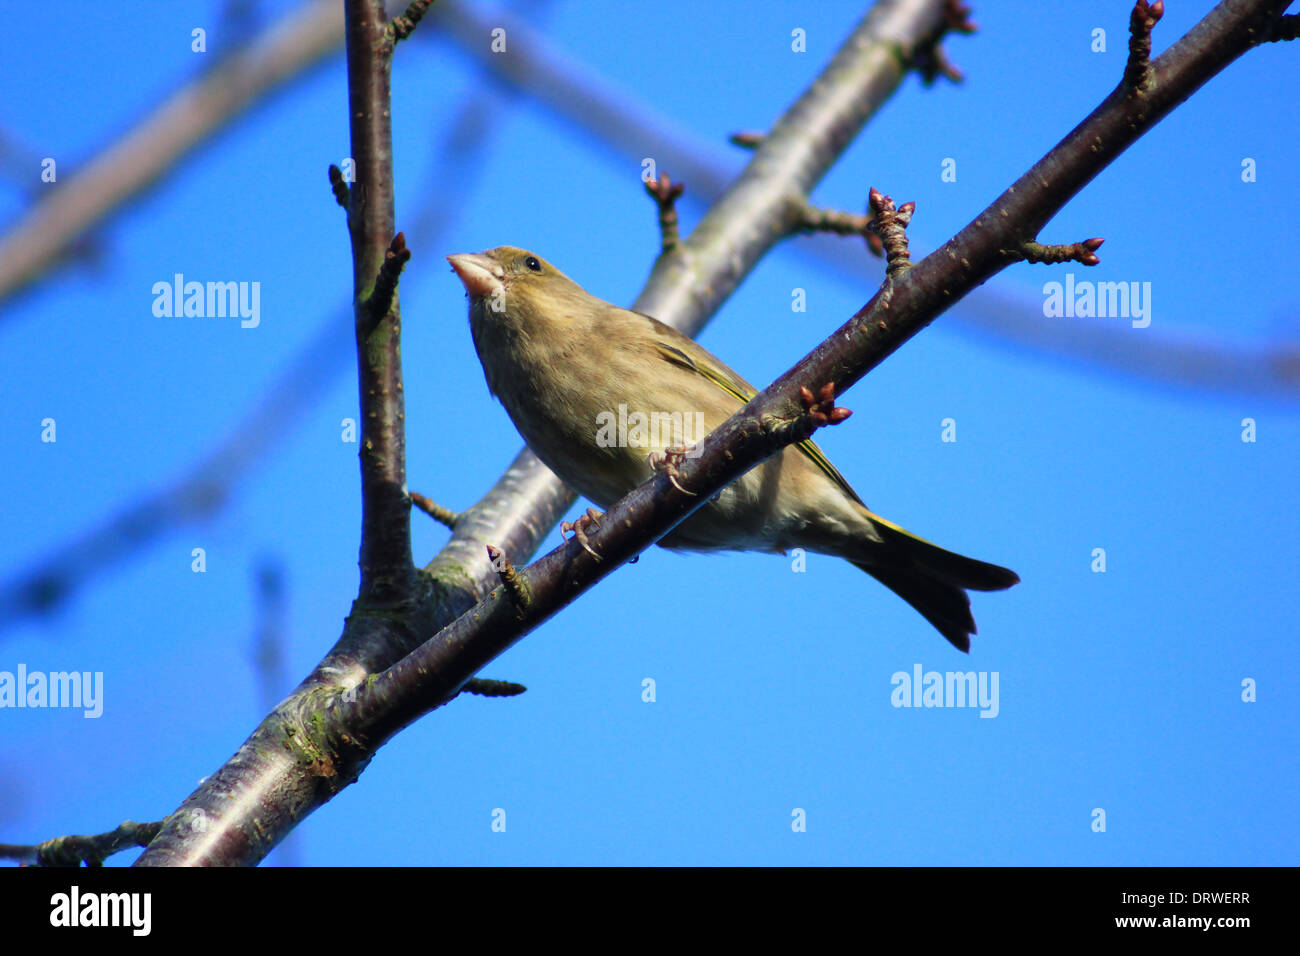 Female greenfinch on tree branch Stock Photo